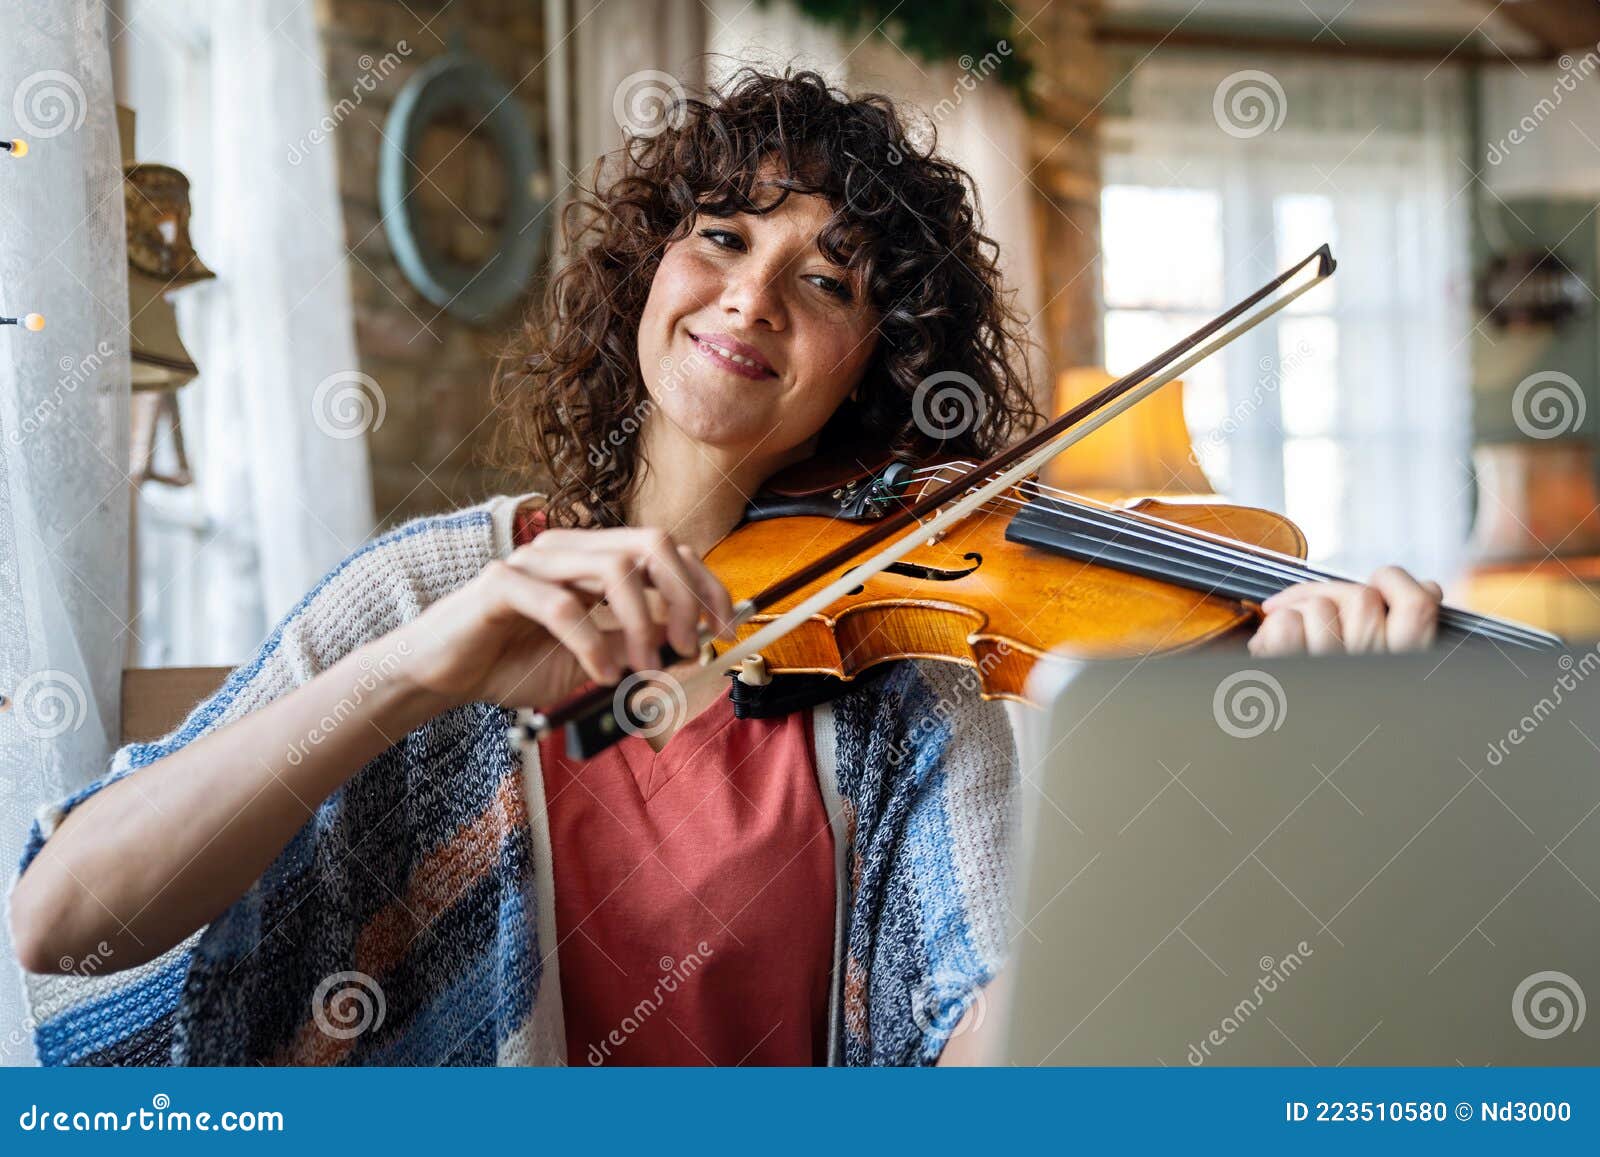 Woman Student Learns To Play the Violin Online Using a Laptop. Stock Image of happy: 223510580